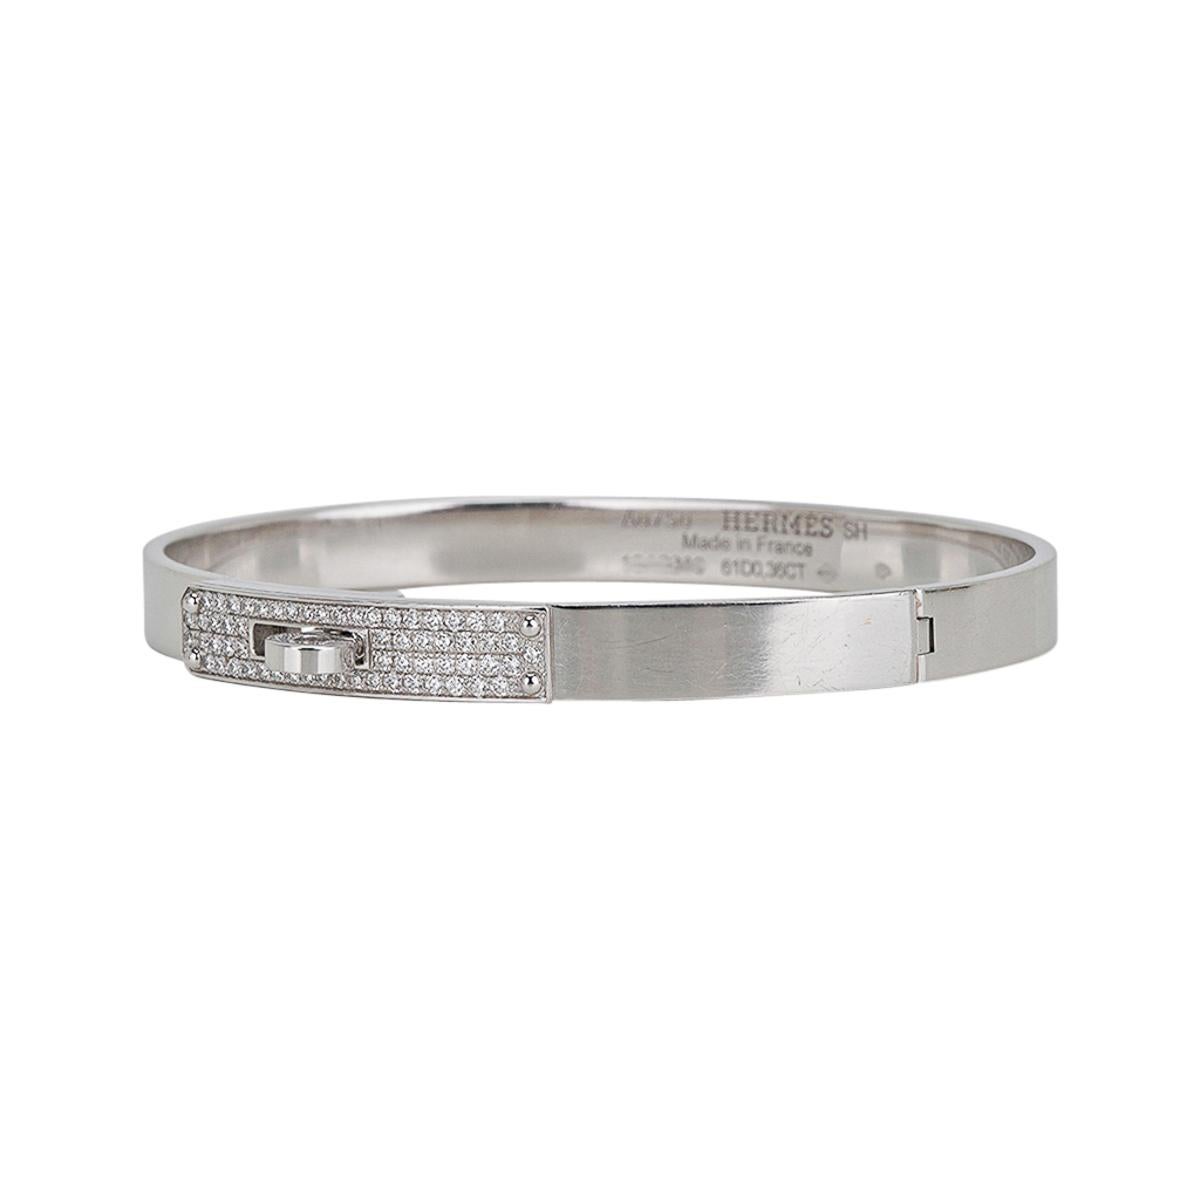 Mightychic offers a chic and instantly recognizable Hermes Kelly Bracelet Small Model.
18k White Gold bracelet set with 61 diamonds.
Total carat weight of the diamonds is 0.36 ct.
Perfect for everyday wear paired with everything from jeans to a